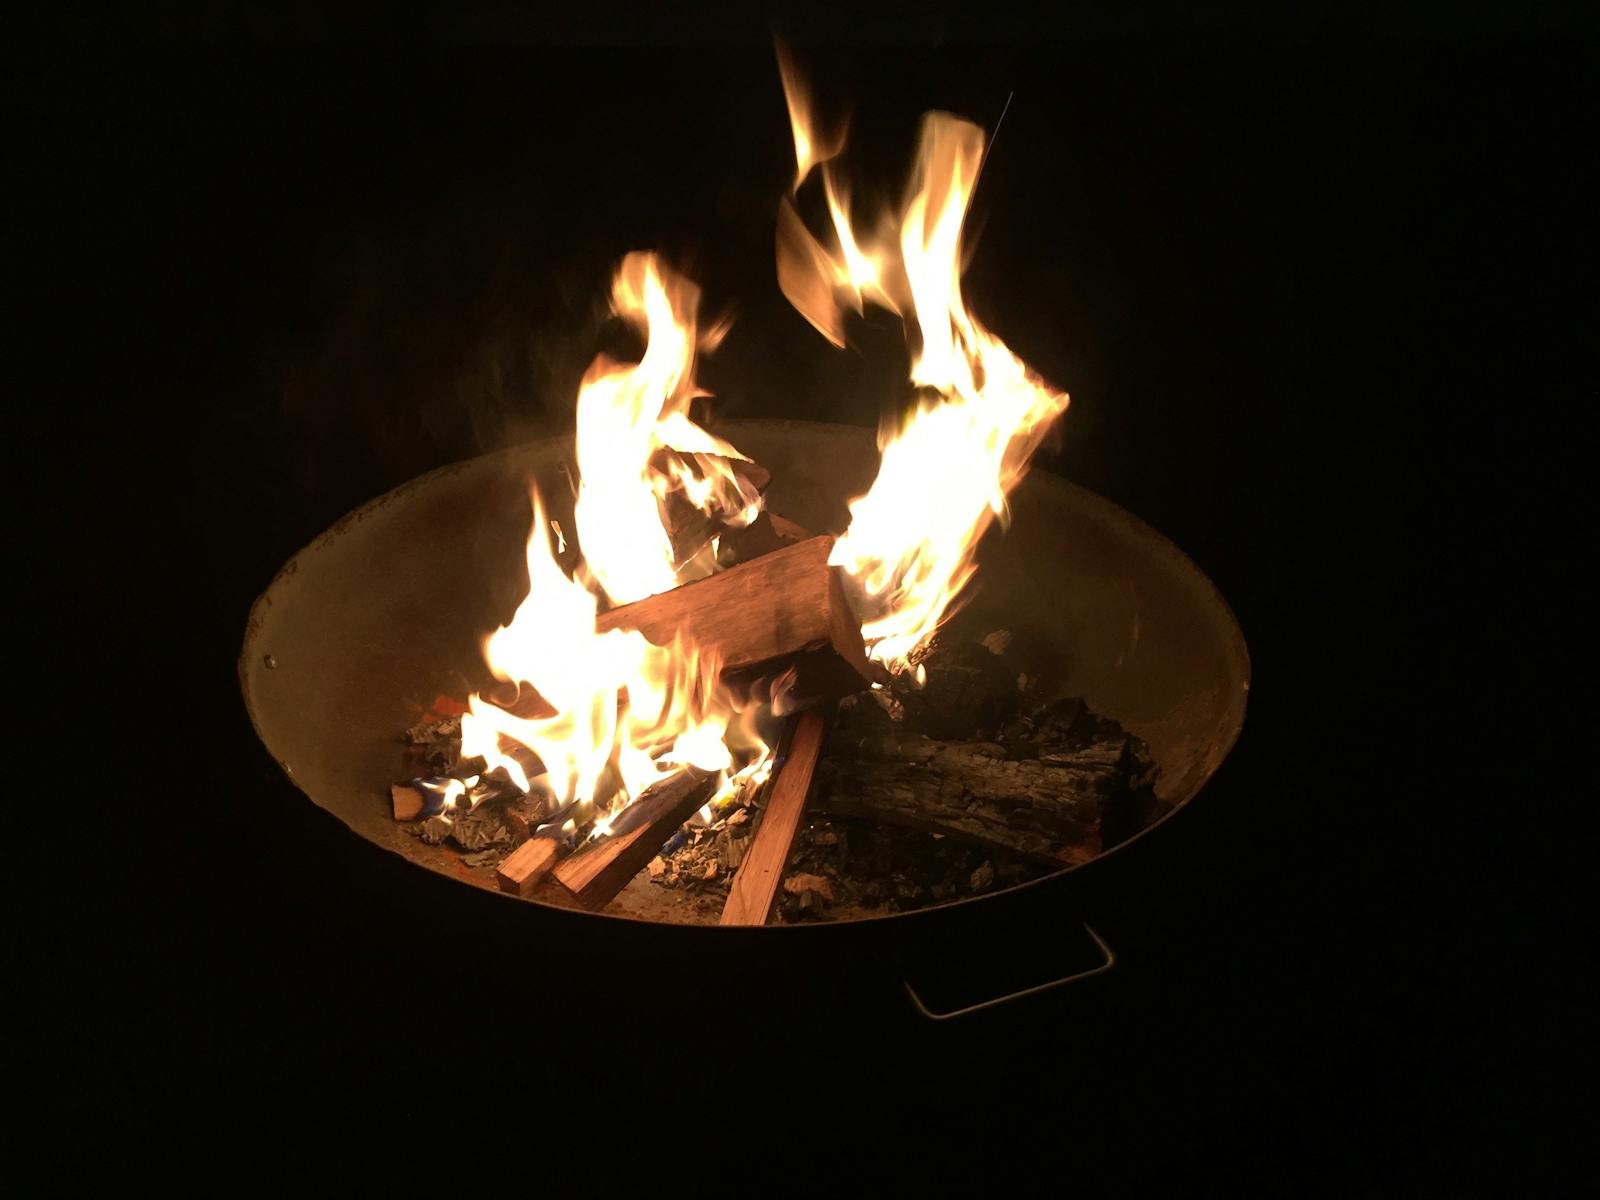 Enjoy a roaring fire pit under the milky way with complimentary firewood.